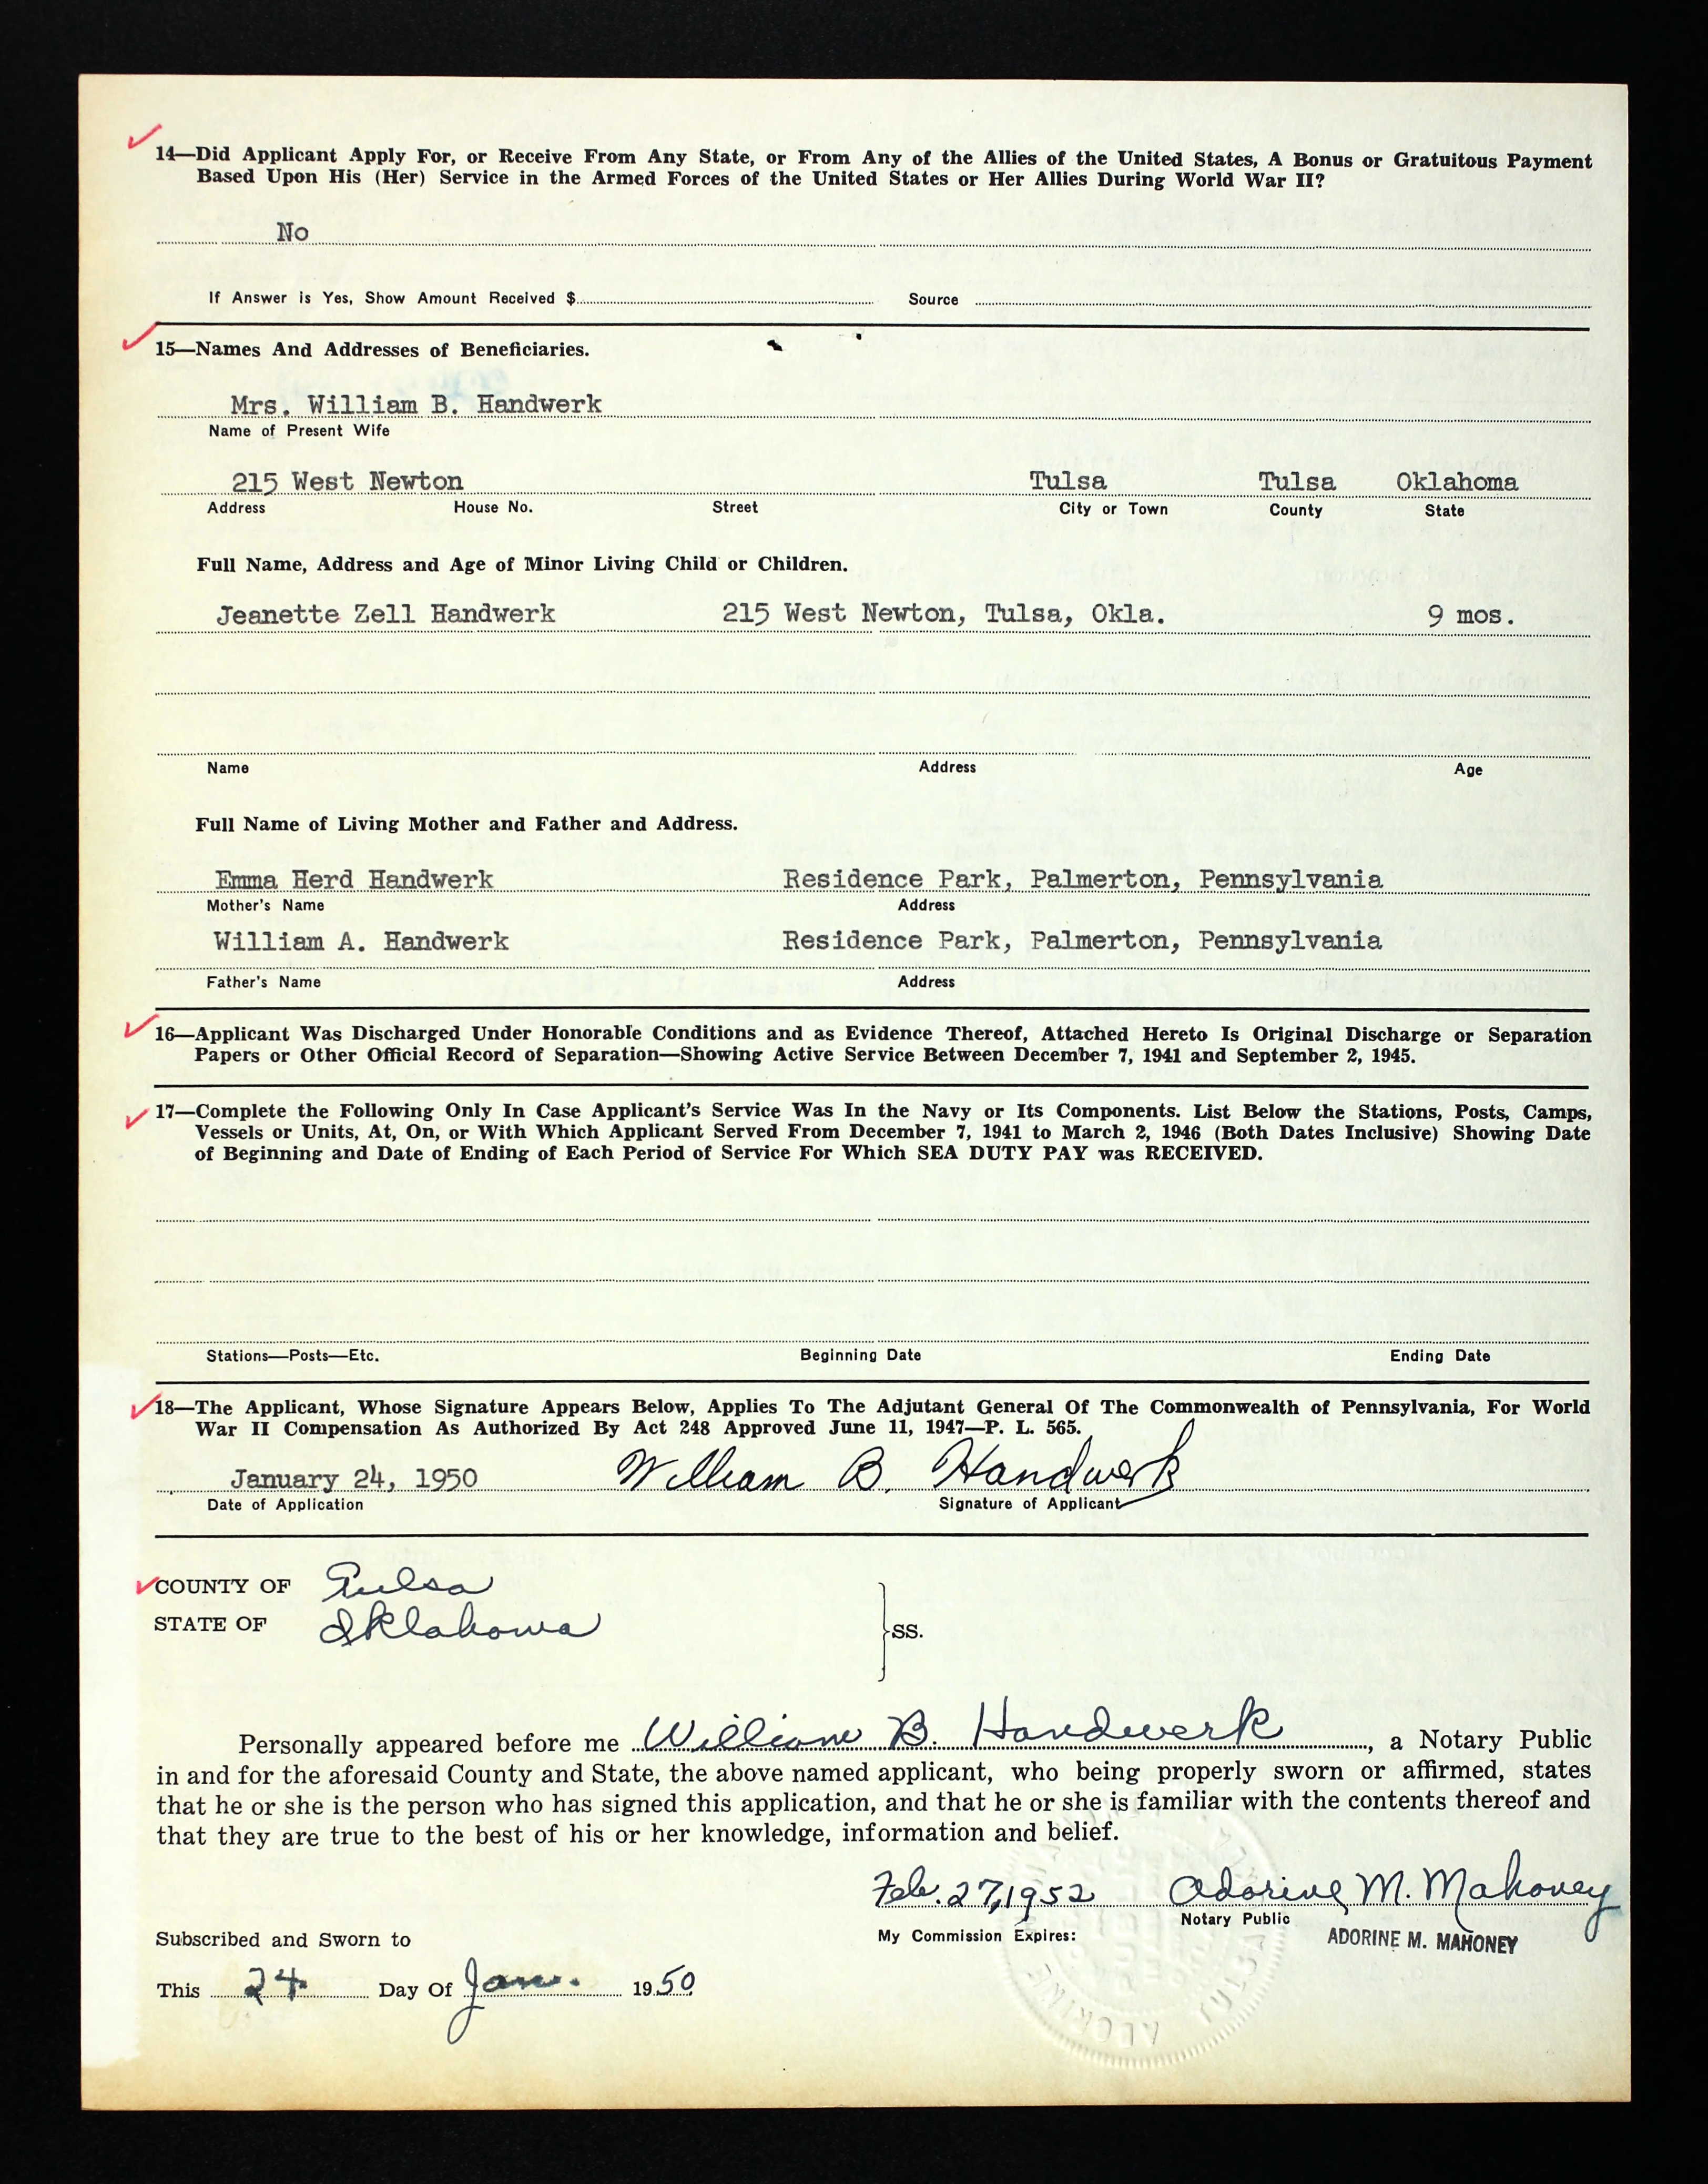 Veterans Compensation Application for the Commonwealth of Pennsylvania (Back Page)